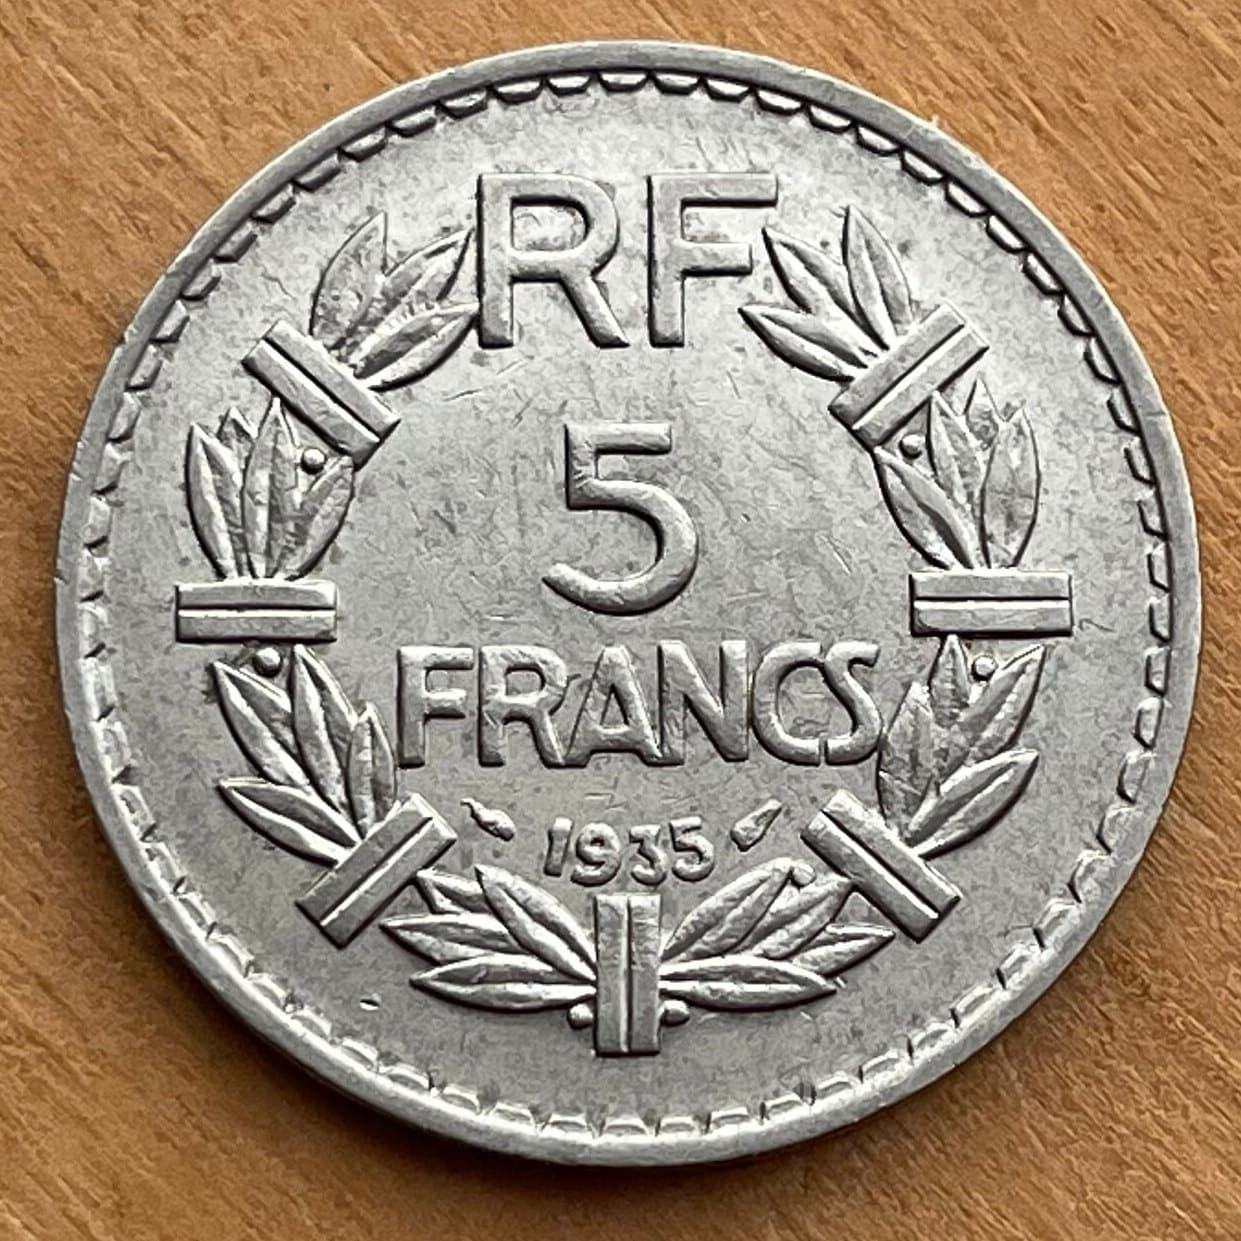 Marianne Laureate 5 Francs France Authentic Coin Money for Jewelry and Craft Making (Third Republic) (Victory Wreath)